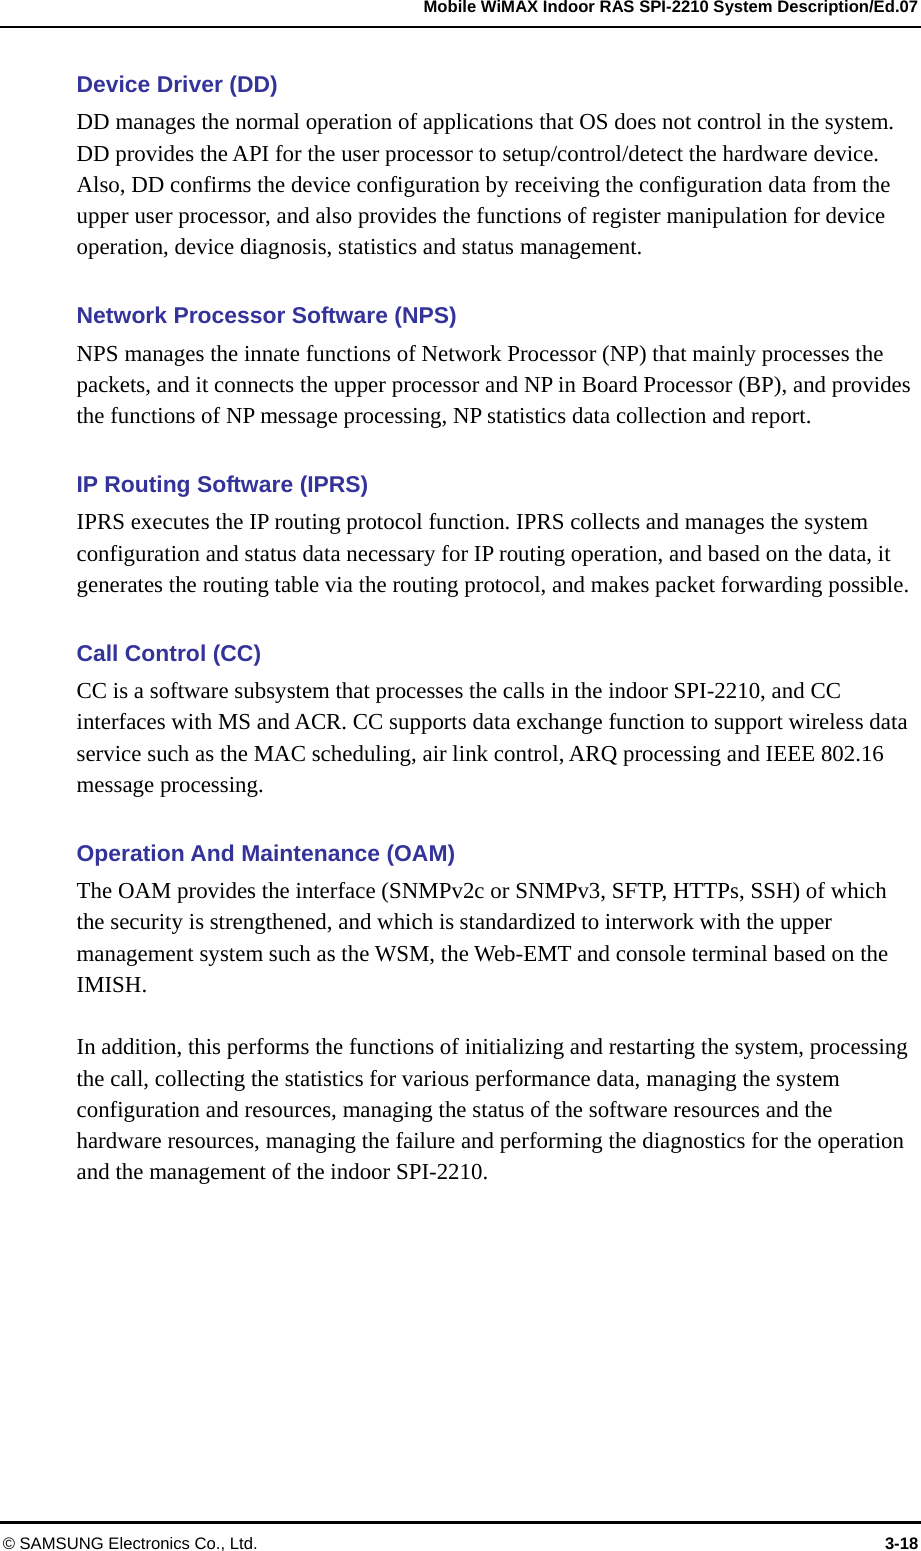   Mobile WiMAX Indoor RAS SPI-2210 System Description/Ed.07 © SAMSUNG Electronics Co., Ltd.  3-18 Device Driver (DD) DD manages the normal operation of applications that OS does not control in the system. DD provides the API for the user processor to setup/control/detect the hardware device. Also, DD confirms the device configuration by receiving the configuration data from the upper user processor, and also provides the functions of register manipulation for device operation, device diagnosis, statistics and status management.  Network Processor Software (NPS) NPS manages the innate functions of Network Processor (NP) that mainly processes the packets, and it connects the upper processor and NP in Board Processor (BP), and provides the functions of NP message processing, NP statistics data collection and report.  IP Routing Software (IPRS) IPRS executes the IP routing protocol function. IPRS collects and manages the system configuration and status data necessary for IP routing operation, and based on the data, it generates the routing table via the routing protocol, and makes packet forwarding possible.  Call Control (CC) CC is a software subsystem that processes the calls in the indoor SPI-2210, and CC interfaces with MS and ACR. CC supports data exchange function to support wireless data service such as the MAC scheduling, air link control, ARQ processing and IEEE 802.16 message processing.  Operation And Maintenance (OAM) The OAM provides the interface (SNMPv2c or SNMPv3, SFTP, HTTPs, SSH) of which the security is strengthened, and which is standardized to interwork with the upper management system such as the WSM, the Web-EMT and console terminal based on the IMISH.  In addition, this performs the functions of initializing and restarting the system, processing the call, collecting the statistics for various performance data, managing the system configuration and resources, managing the status of the software resources and the hardware resources, managing the failure and performing the diagnostics for the operation and the management of the indoor SPI-2210.  